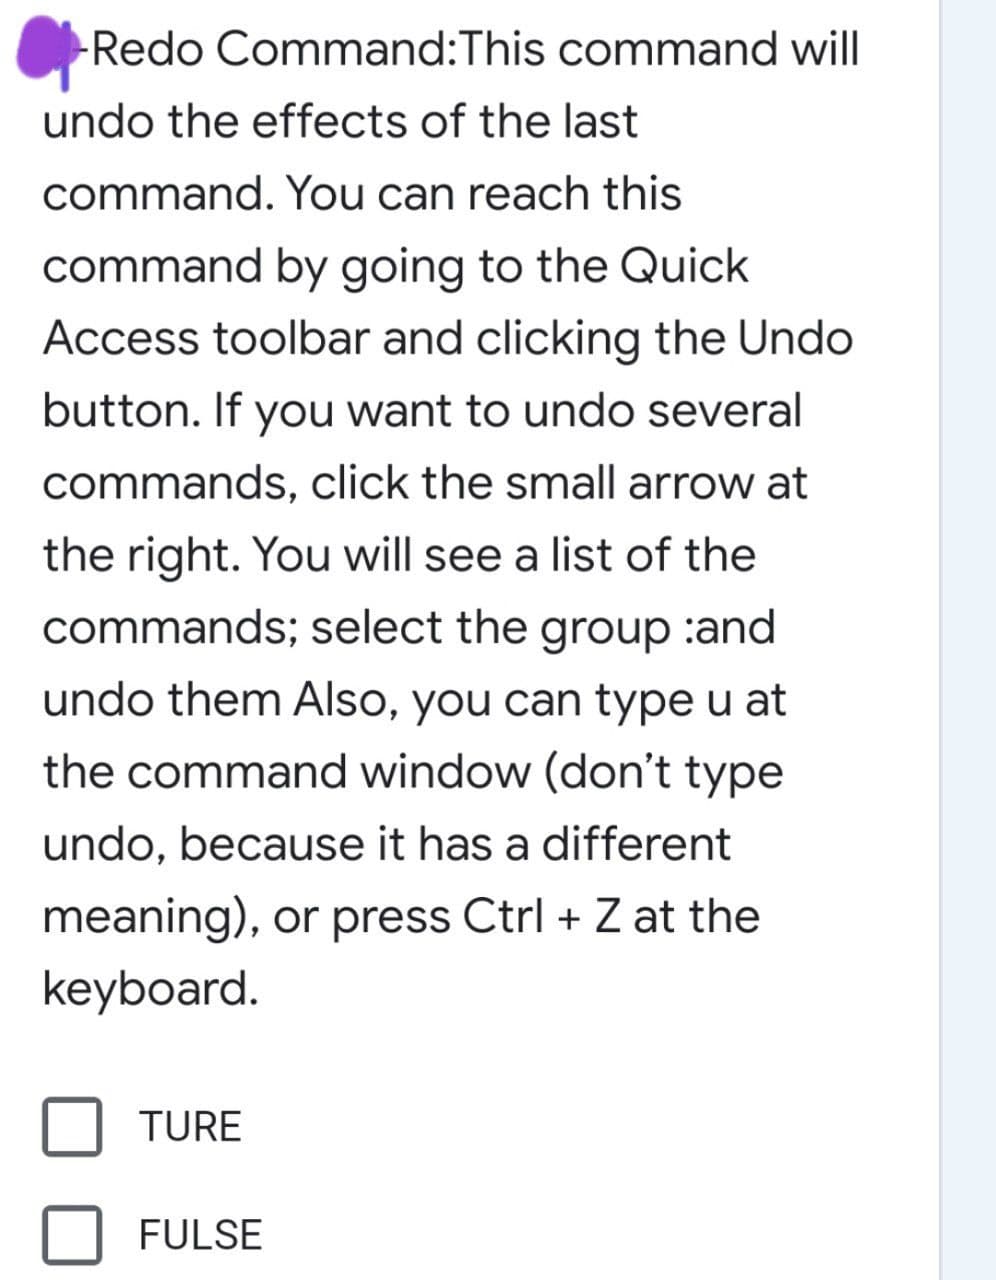 Redo Command:This command will
undo the effects of the last
command. You can reach this
command by going to the Quick
Access toolbar and clicking the Undo
button. If you want to undo several
commands, click the small arrow at
the right. You will see a list of the
commands; select the group :and
undo them Also, you can type u at
the command window (don't type
undo, because it has a different
meaning), or press Ctrl + Z at the
keyboard.
TURE
FULSE
